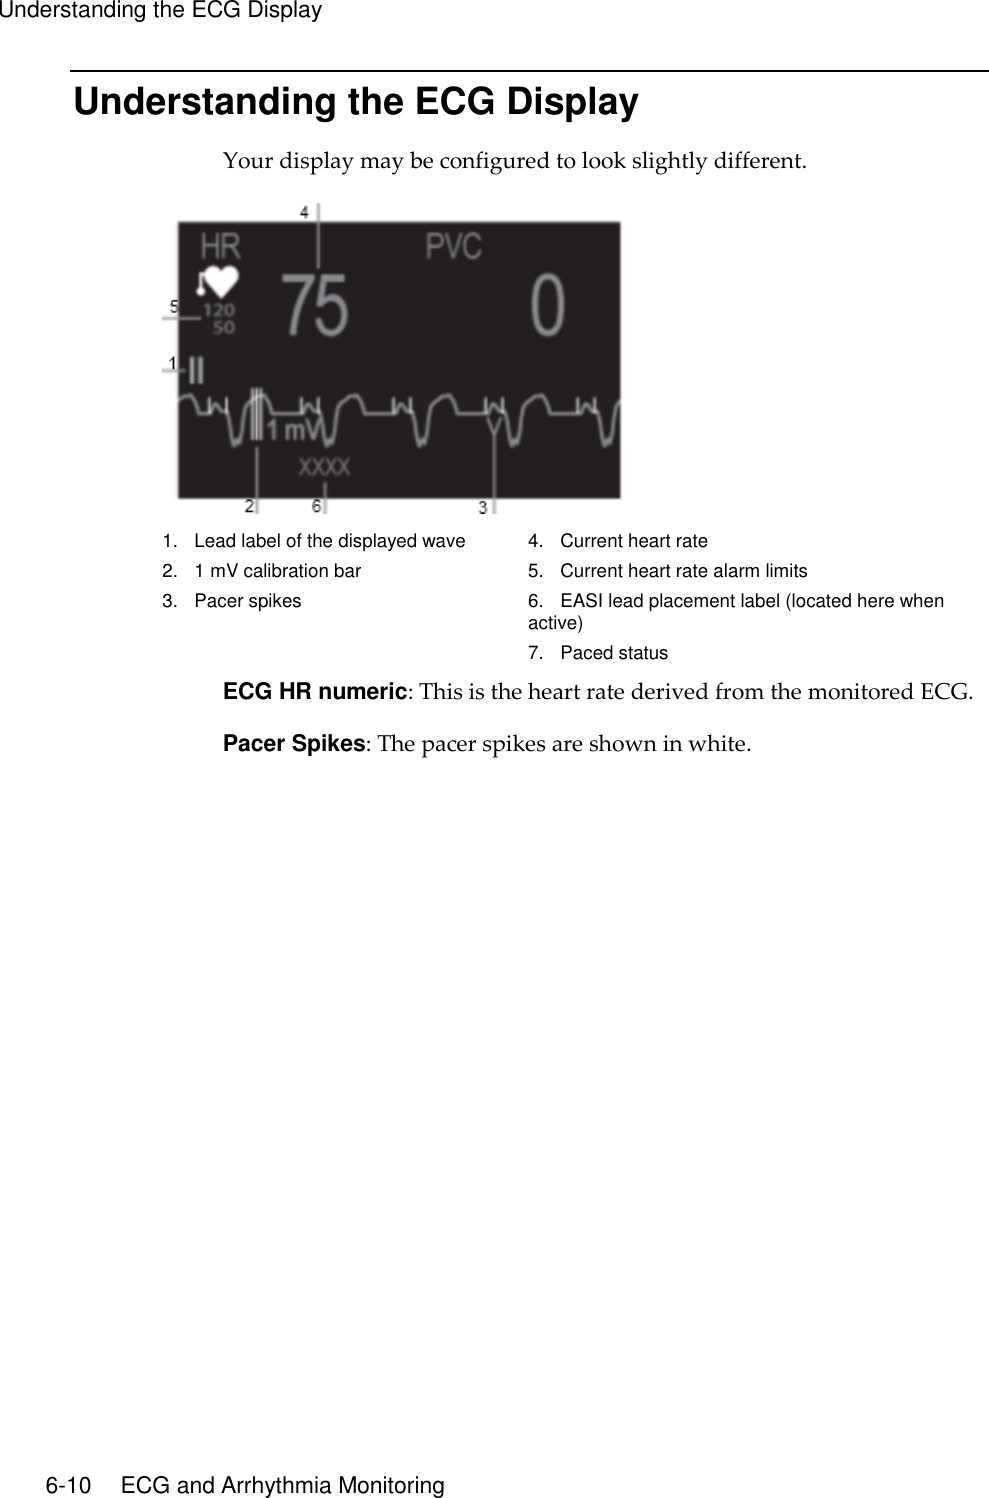 Understanding the ECG Display   6-10    ECG and Arrhythmia Monitoring Understanding the ECG Display Your display may be configured to look slightly different.  1.    Lead label of the displayed wave 2.    1 mV calibration bar 3.    Pacer spikes 4.    Current heart rate 5.    Current heart rate alarm limits 6.    EASI lead placement label (located here when active) 7.    Paced status ECG HR numeric: This is the heart rate derived from the monitored ECG. Pacer Spikes: The pacer spikes are shown in white.  